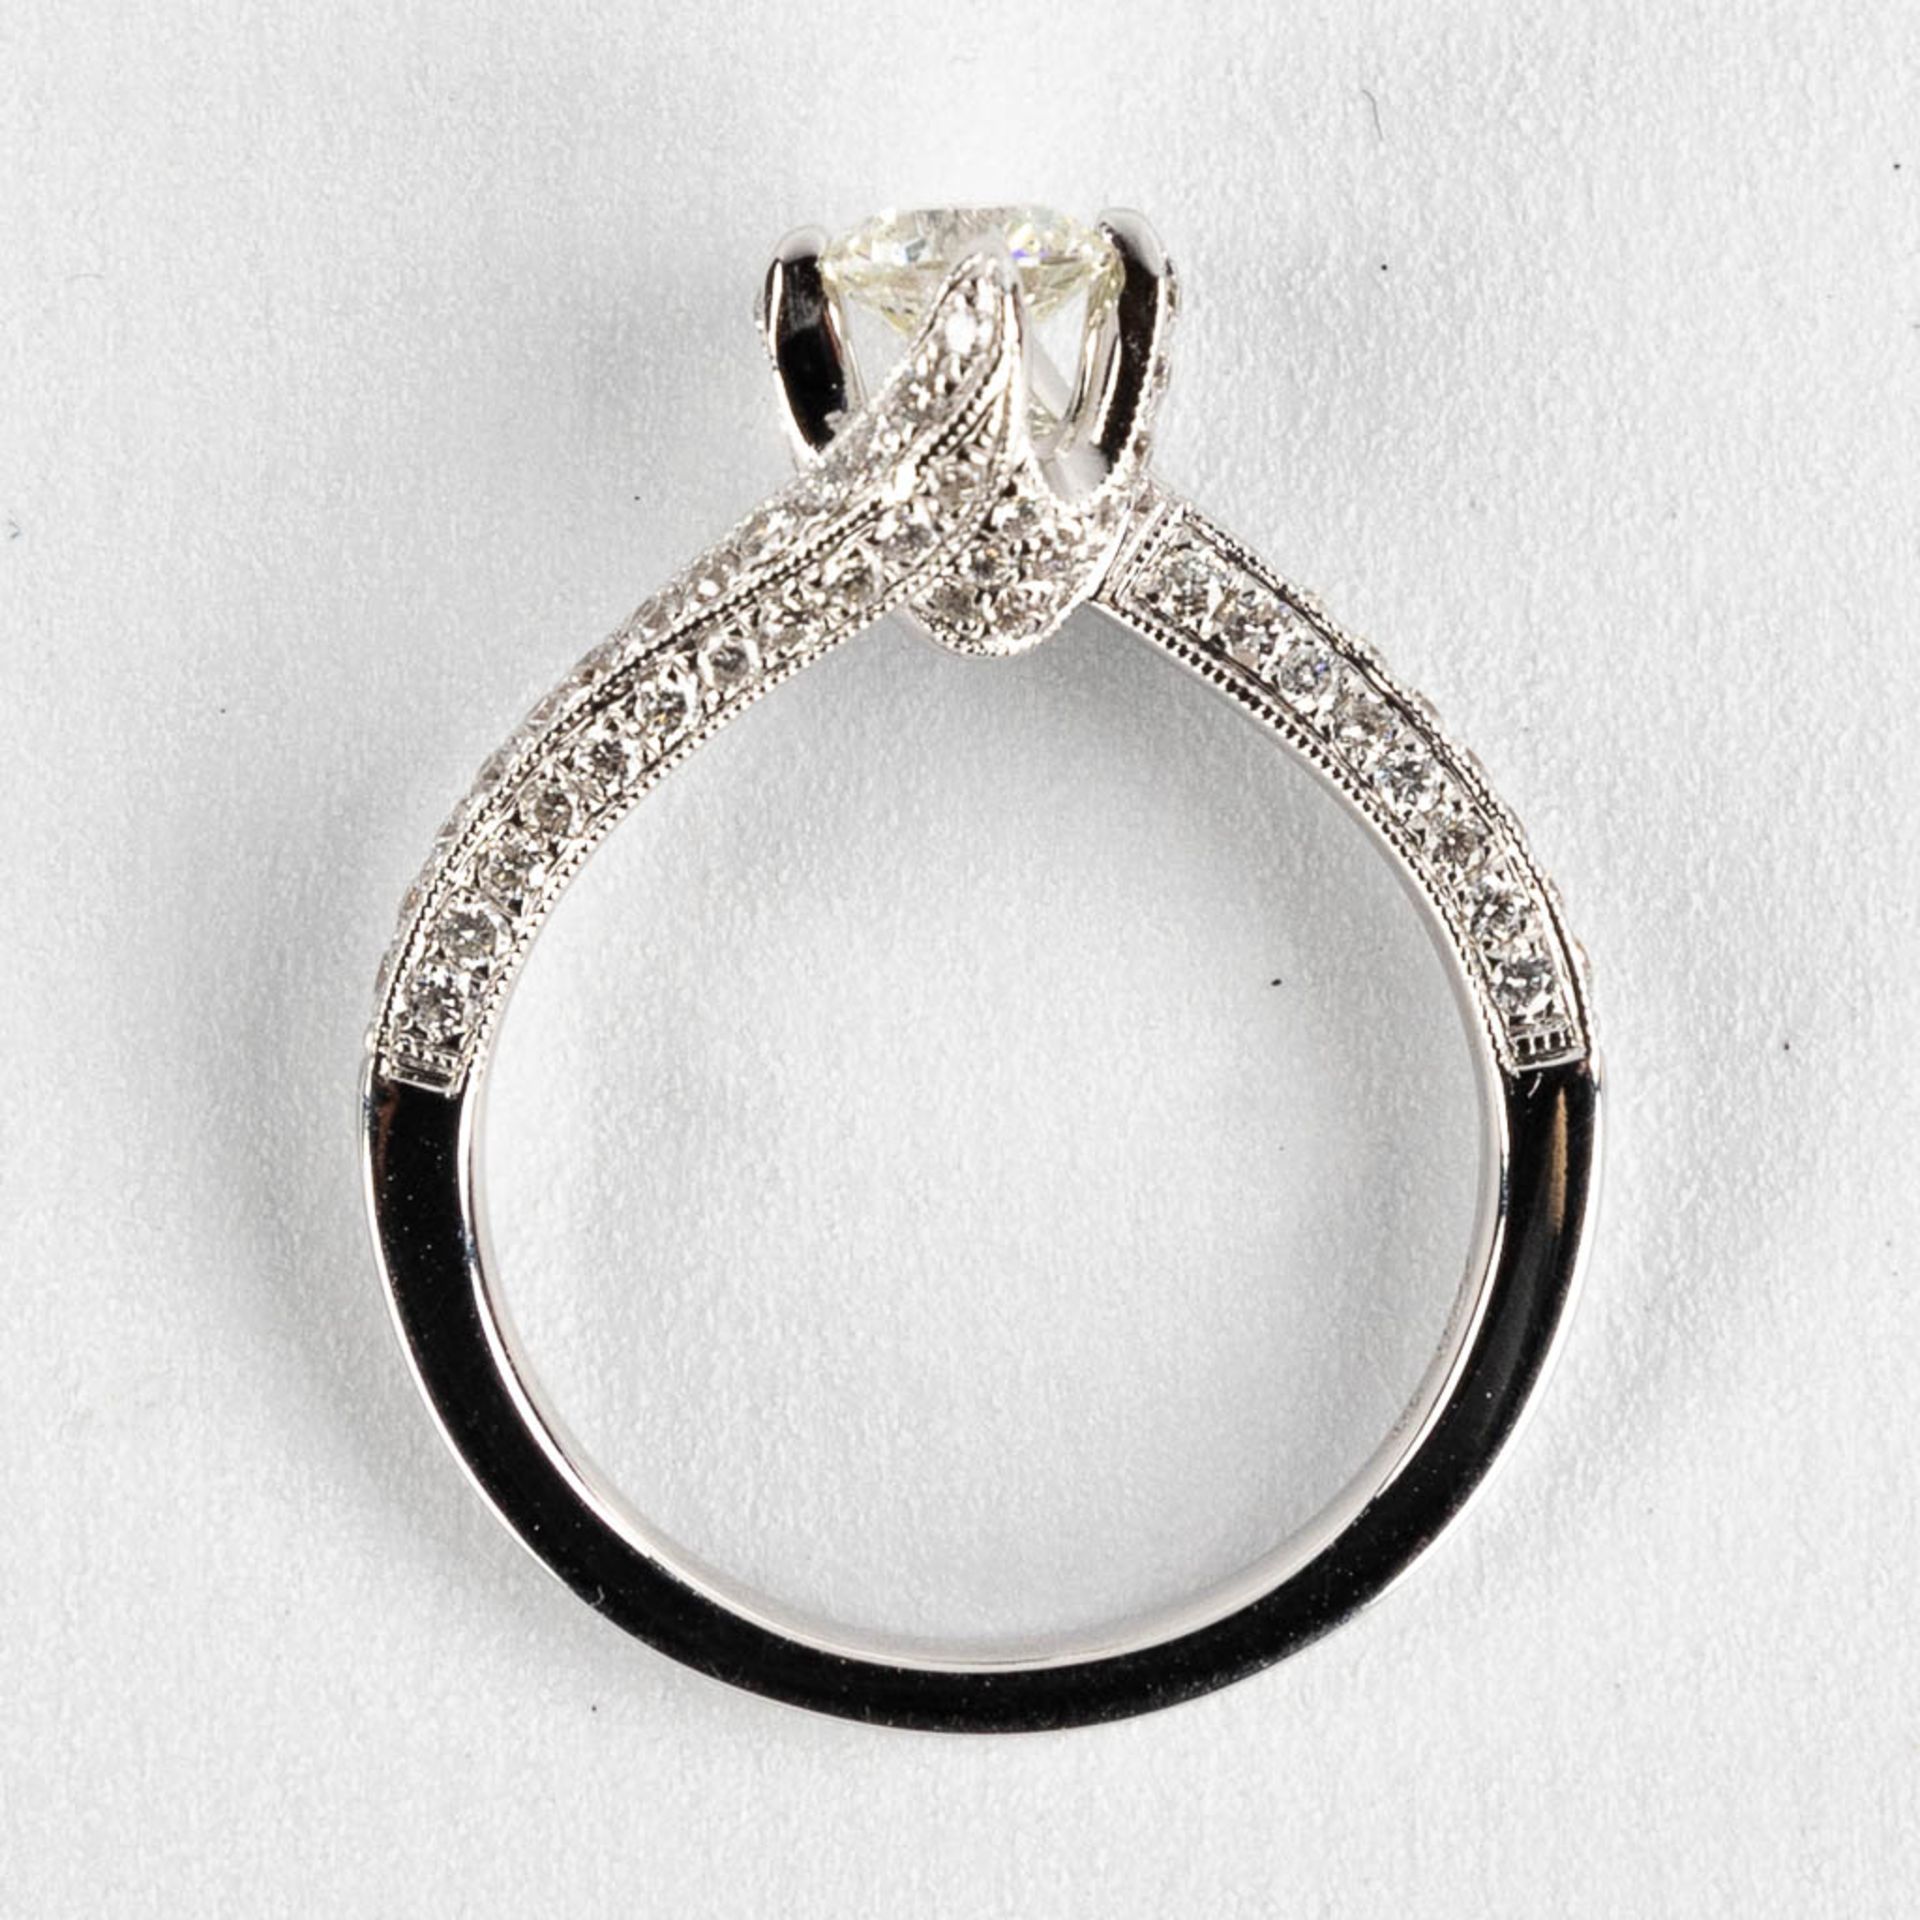 A ring, white gold with brilliant cut diamonds, central stone approximately 0,5ct, total appr. 0,53c - Image 7 of 10